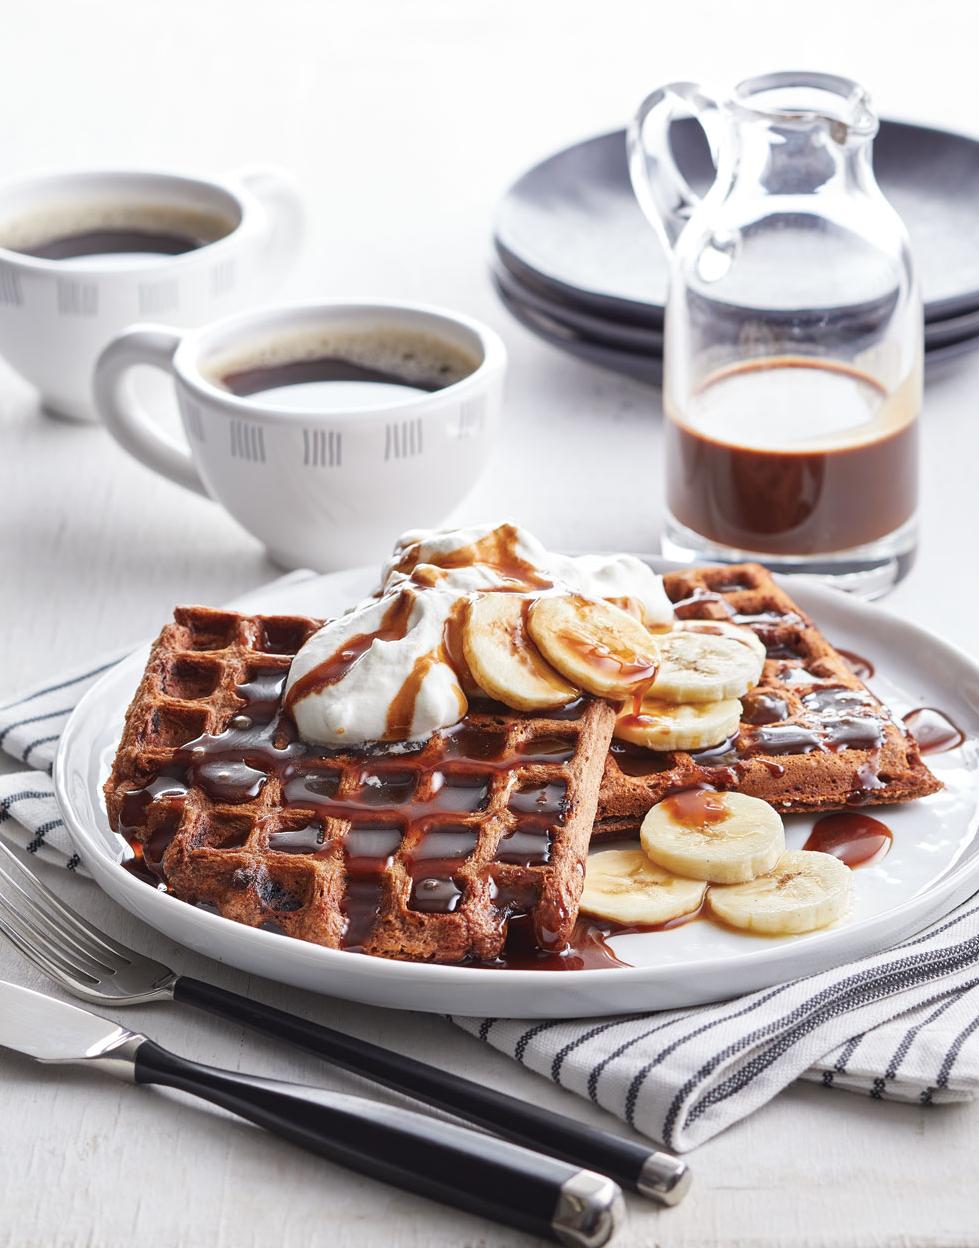  These waffles are the perfect balance of coffee and chocolate flavors.